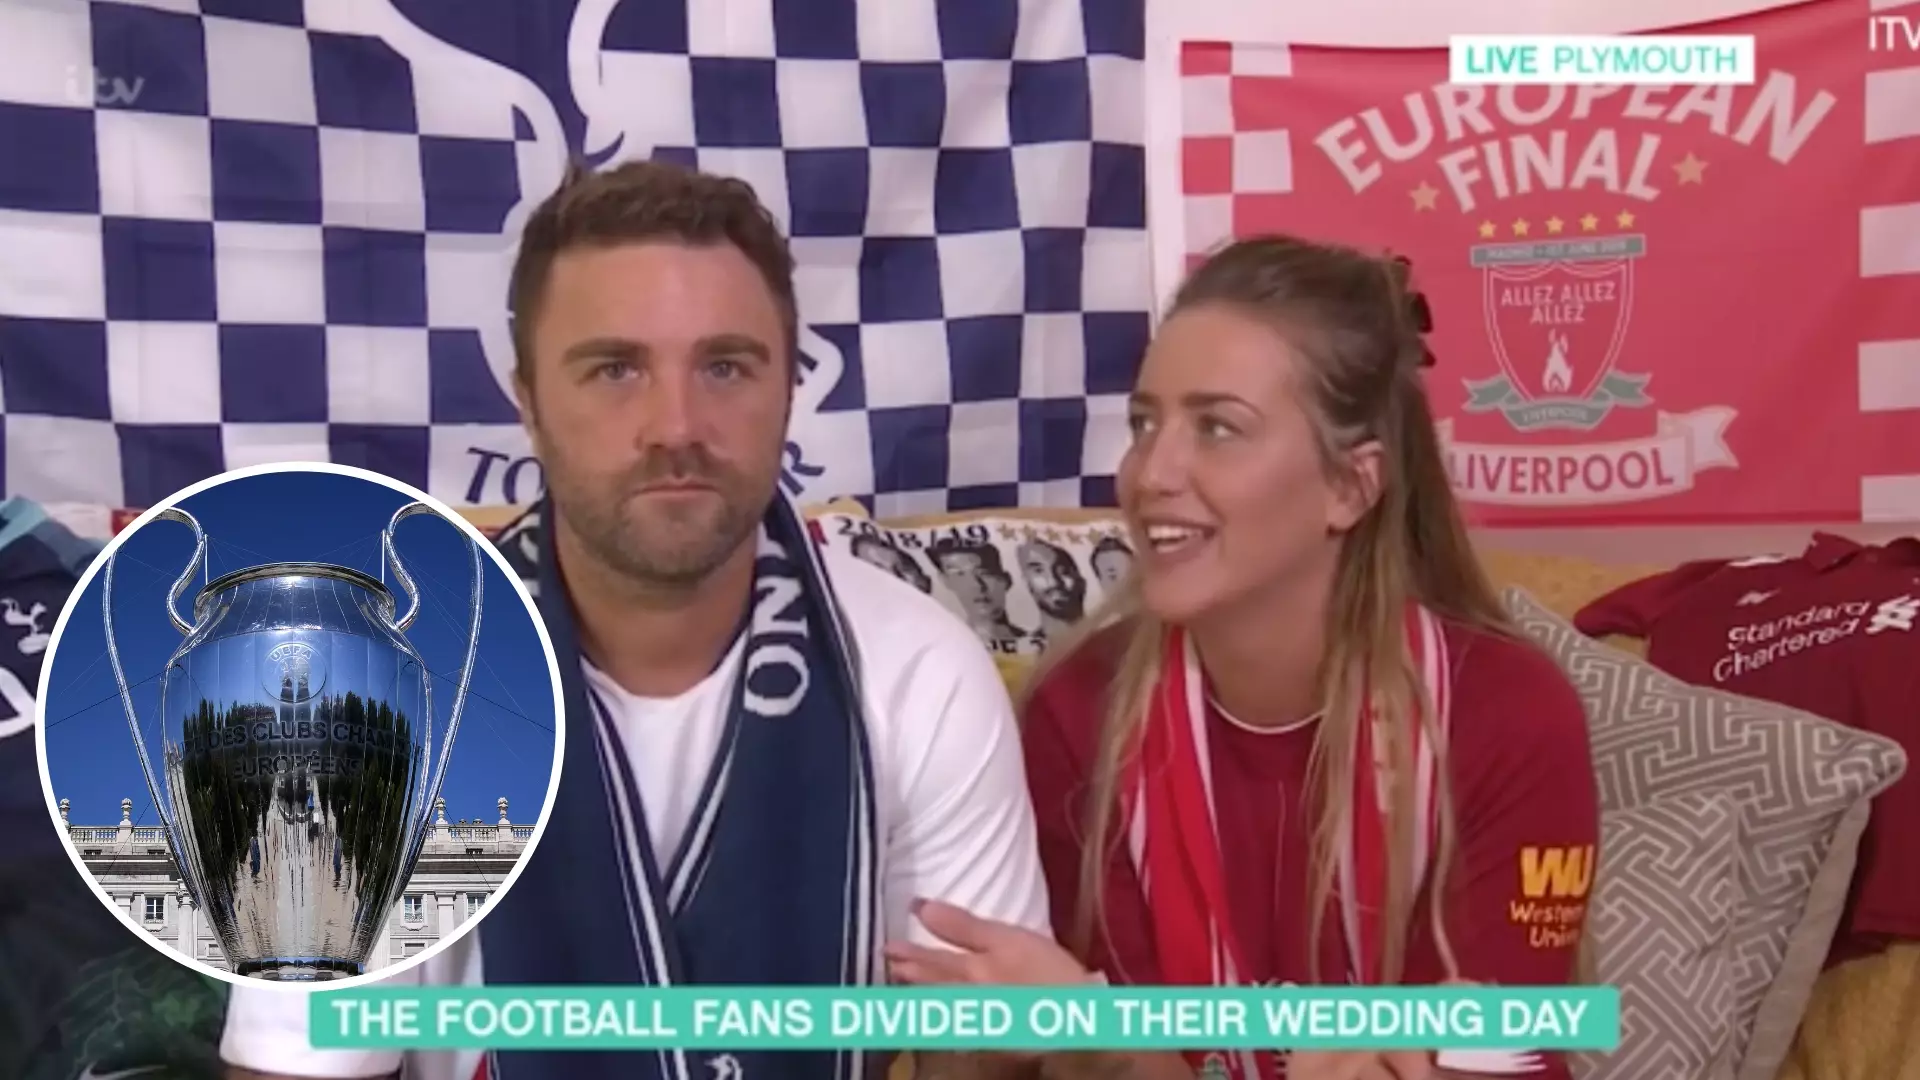 Liverpool Supporter And Spurs Fan Plan To Show The Champions League Final At Their Wedding